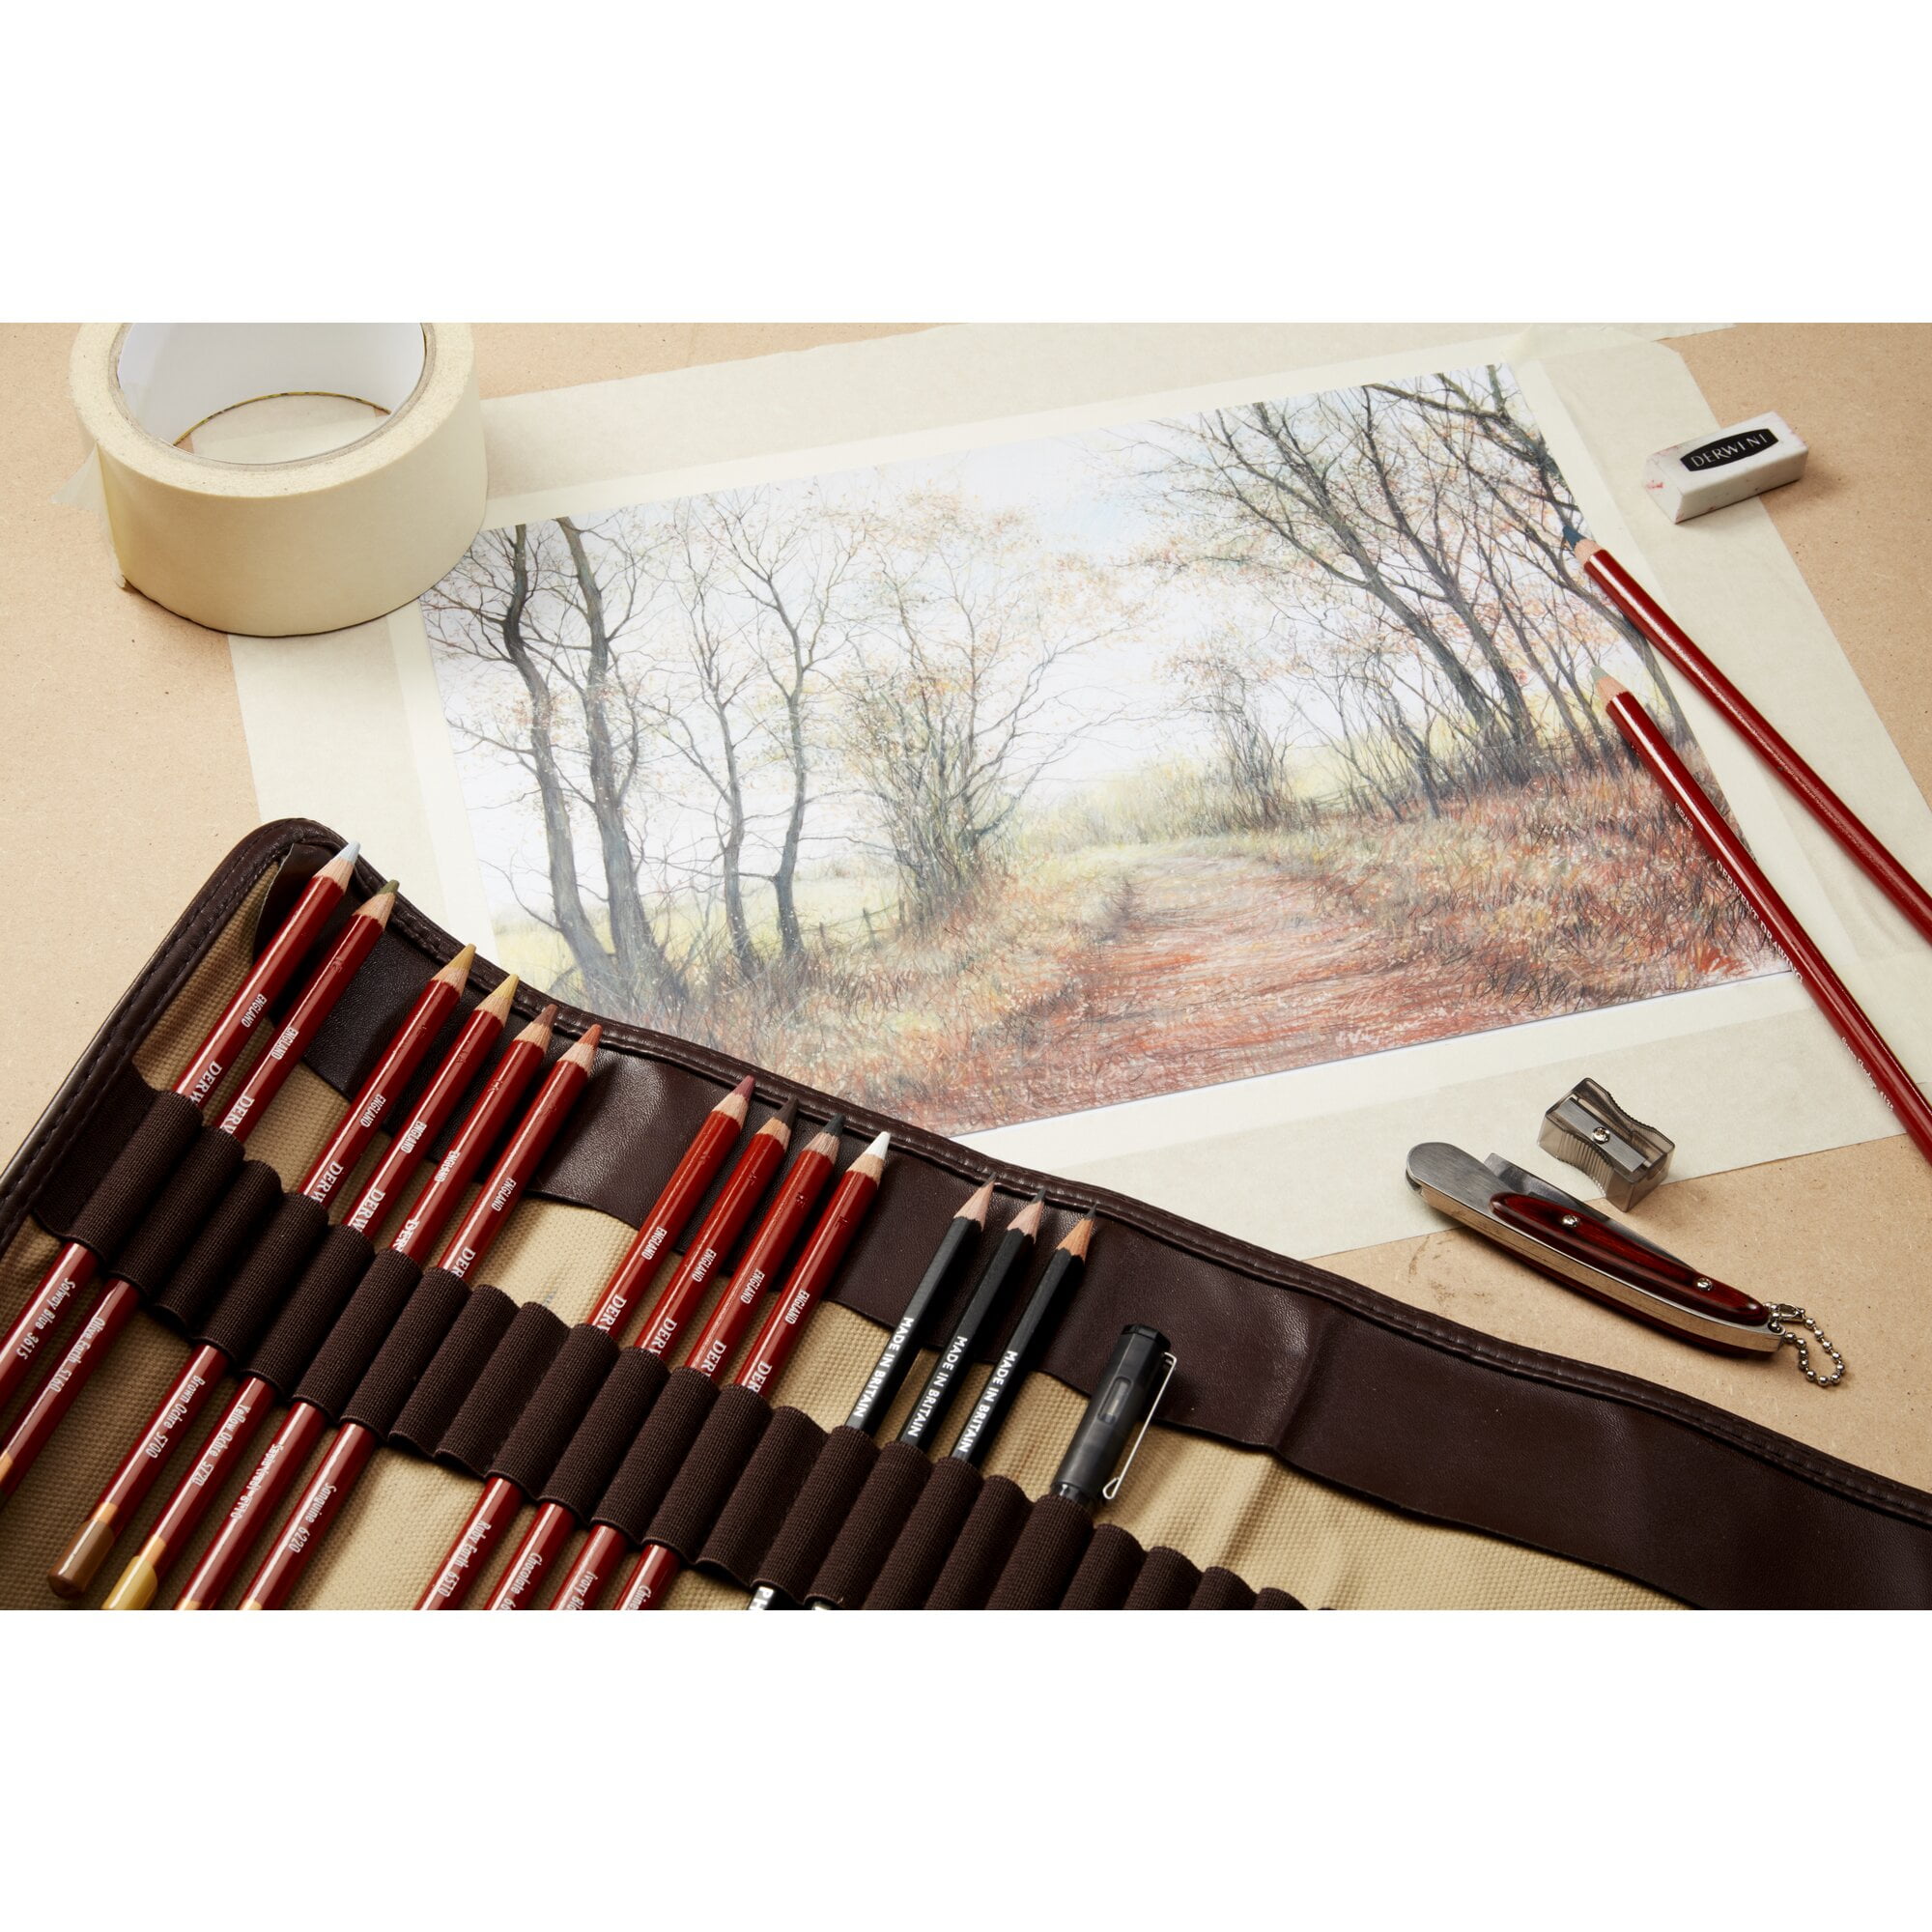 DERWENT DRAWING PENCILS REVIEW  Reviewing the 24 Set of These Awesome  Derwent Pencils! 